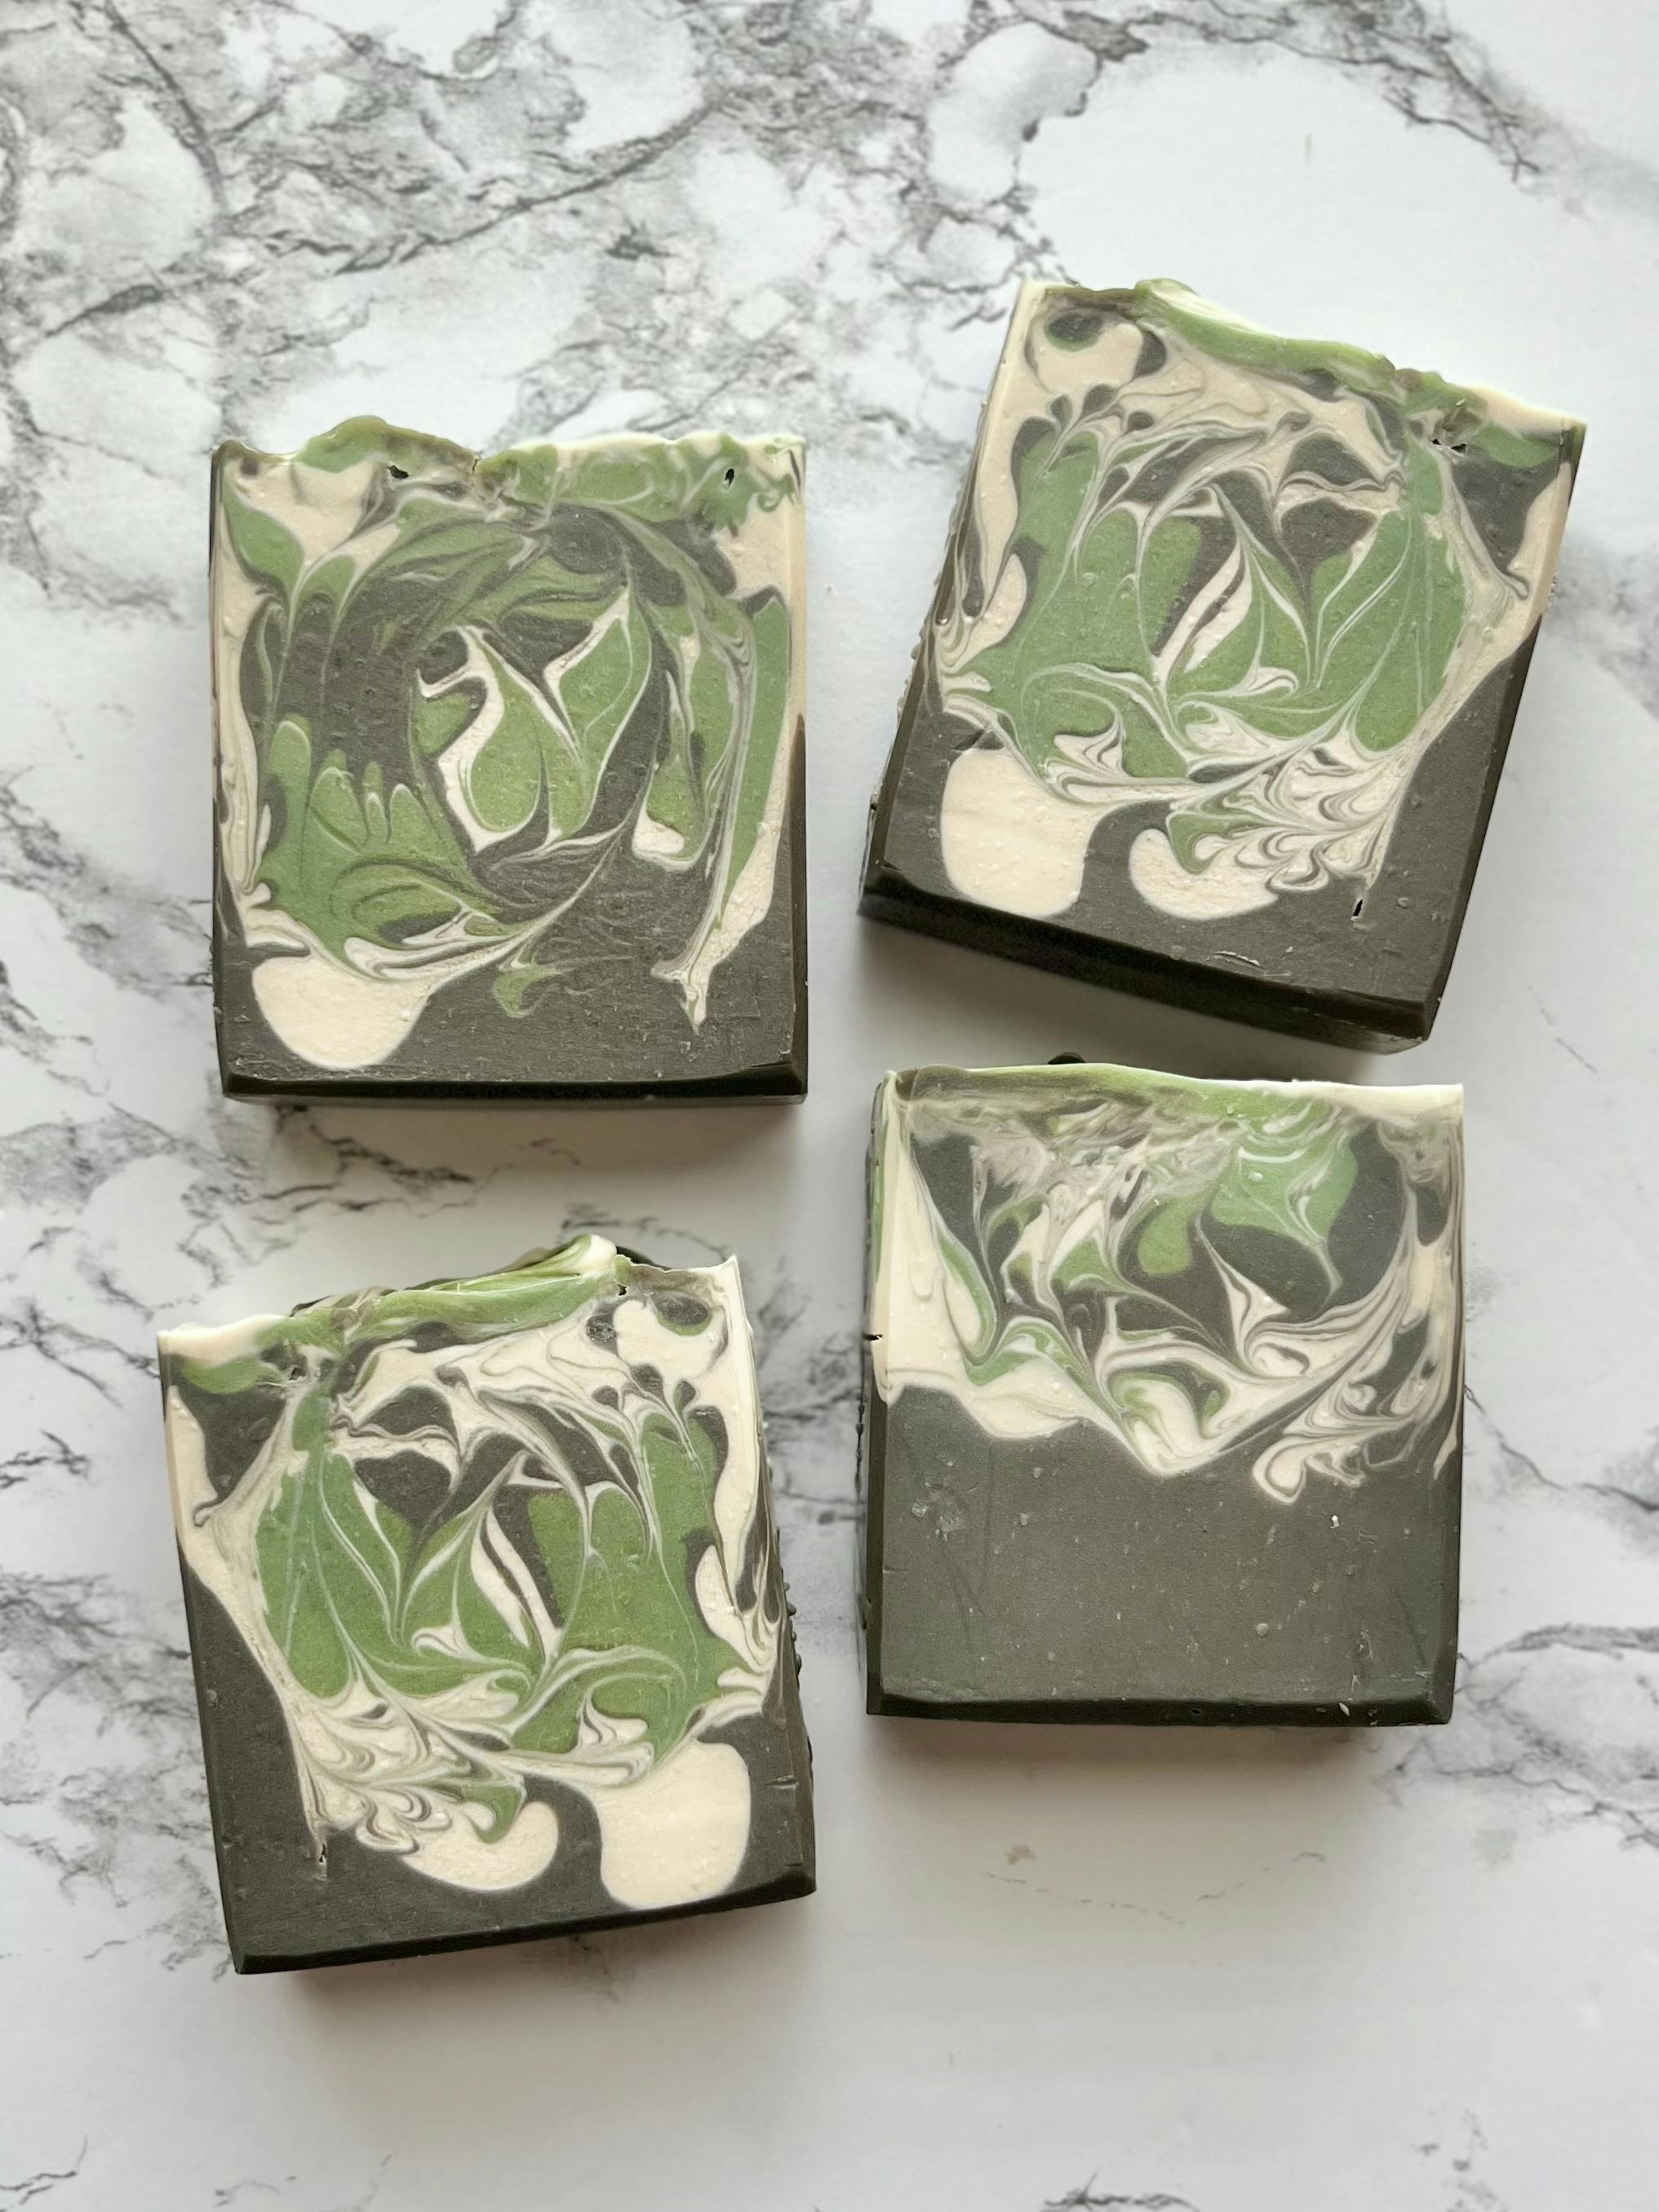 Into the Woods Artisan Soap